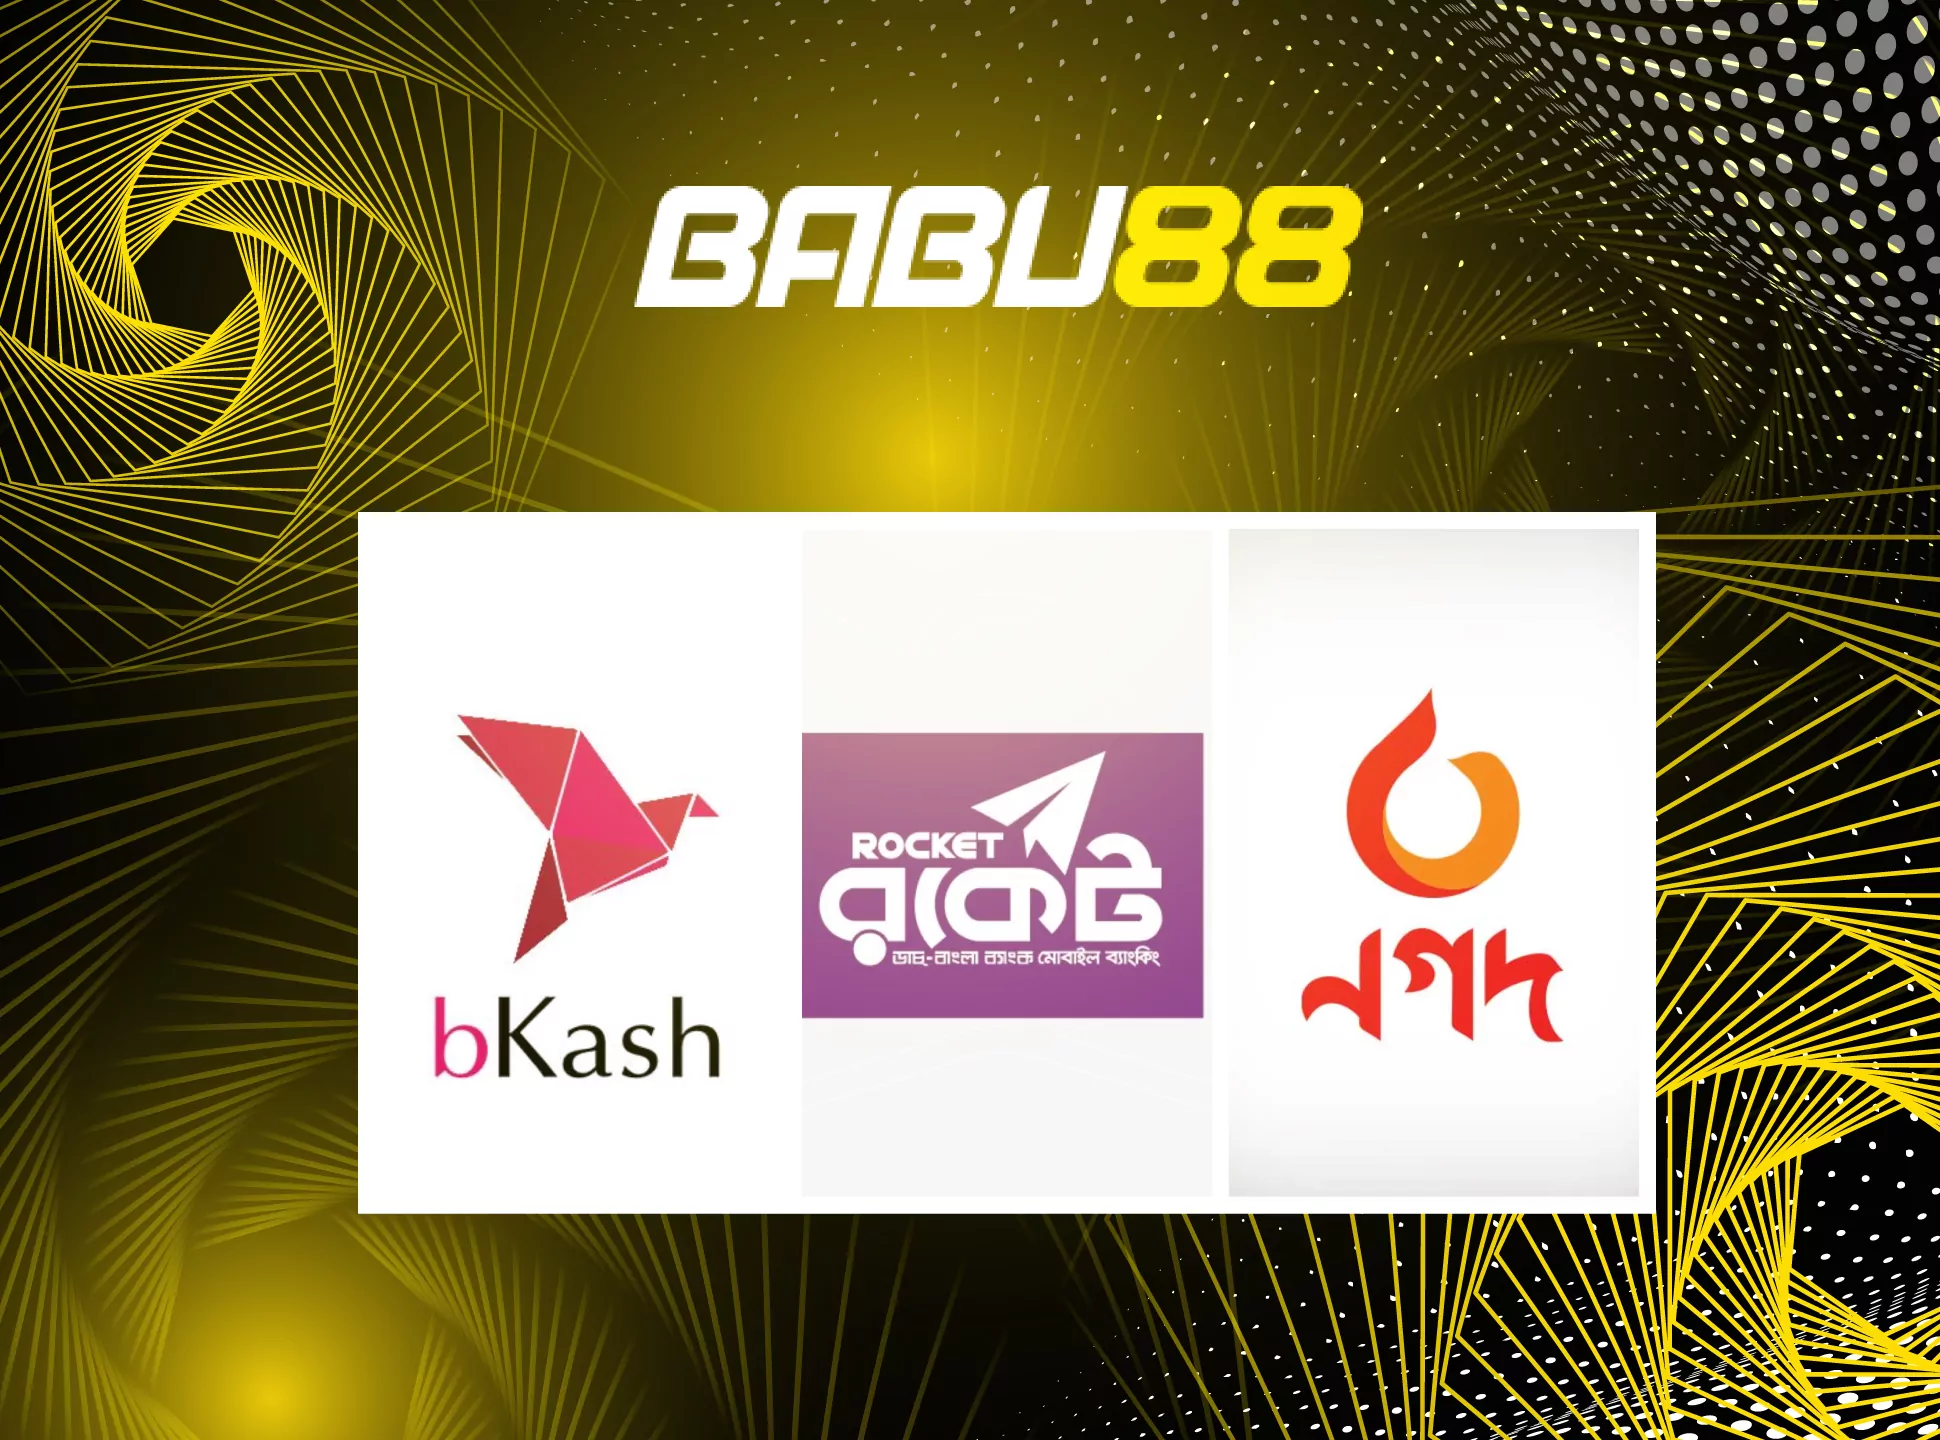 There are many various payment methods at Babu88.